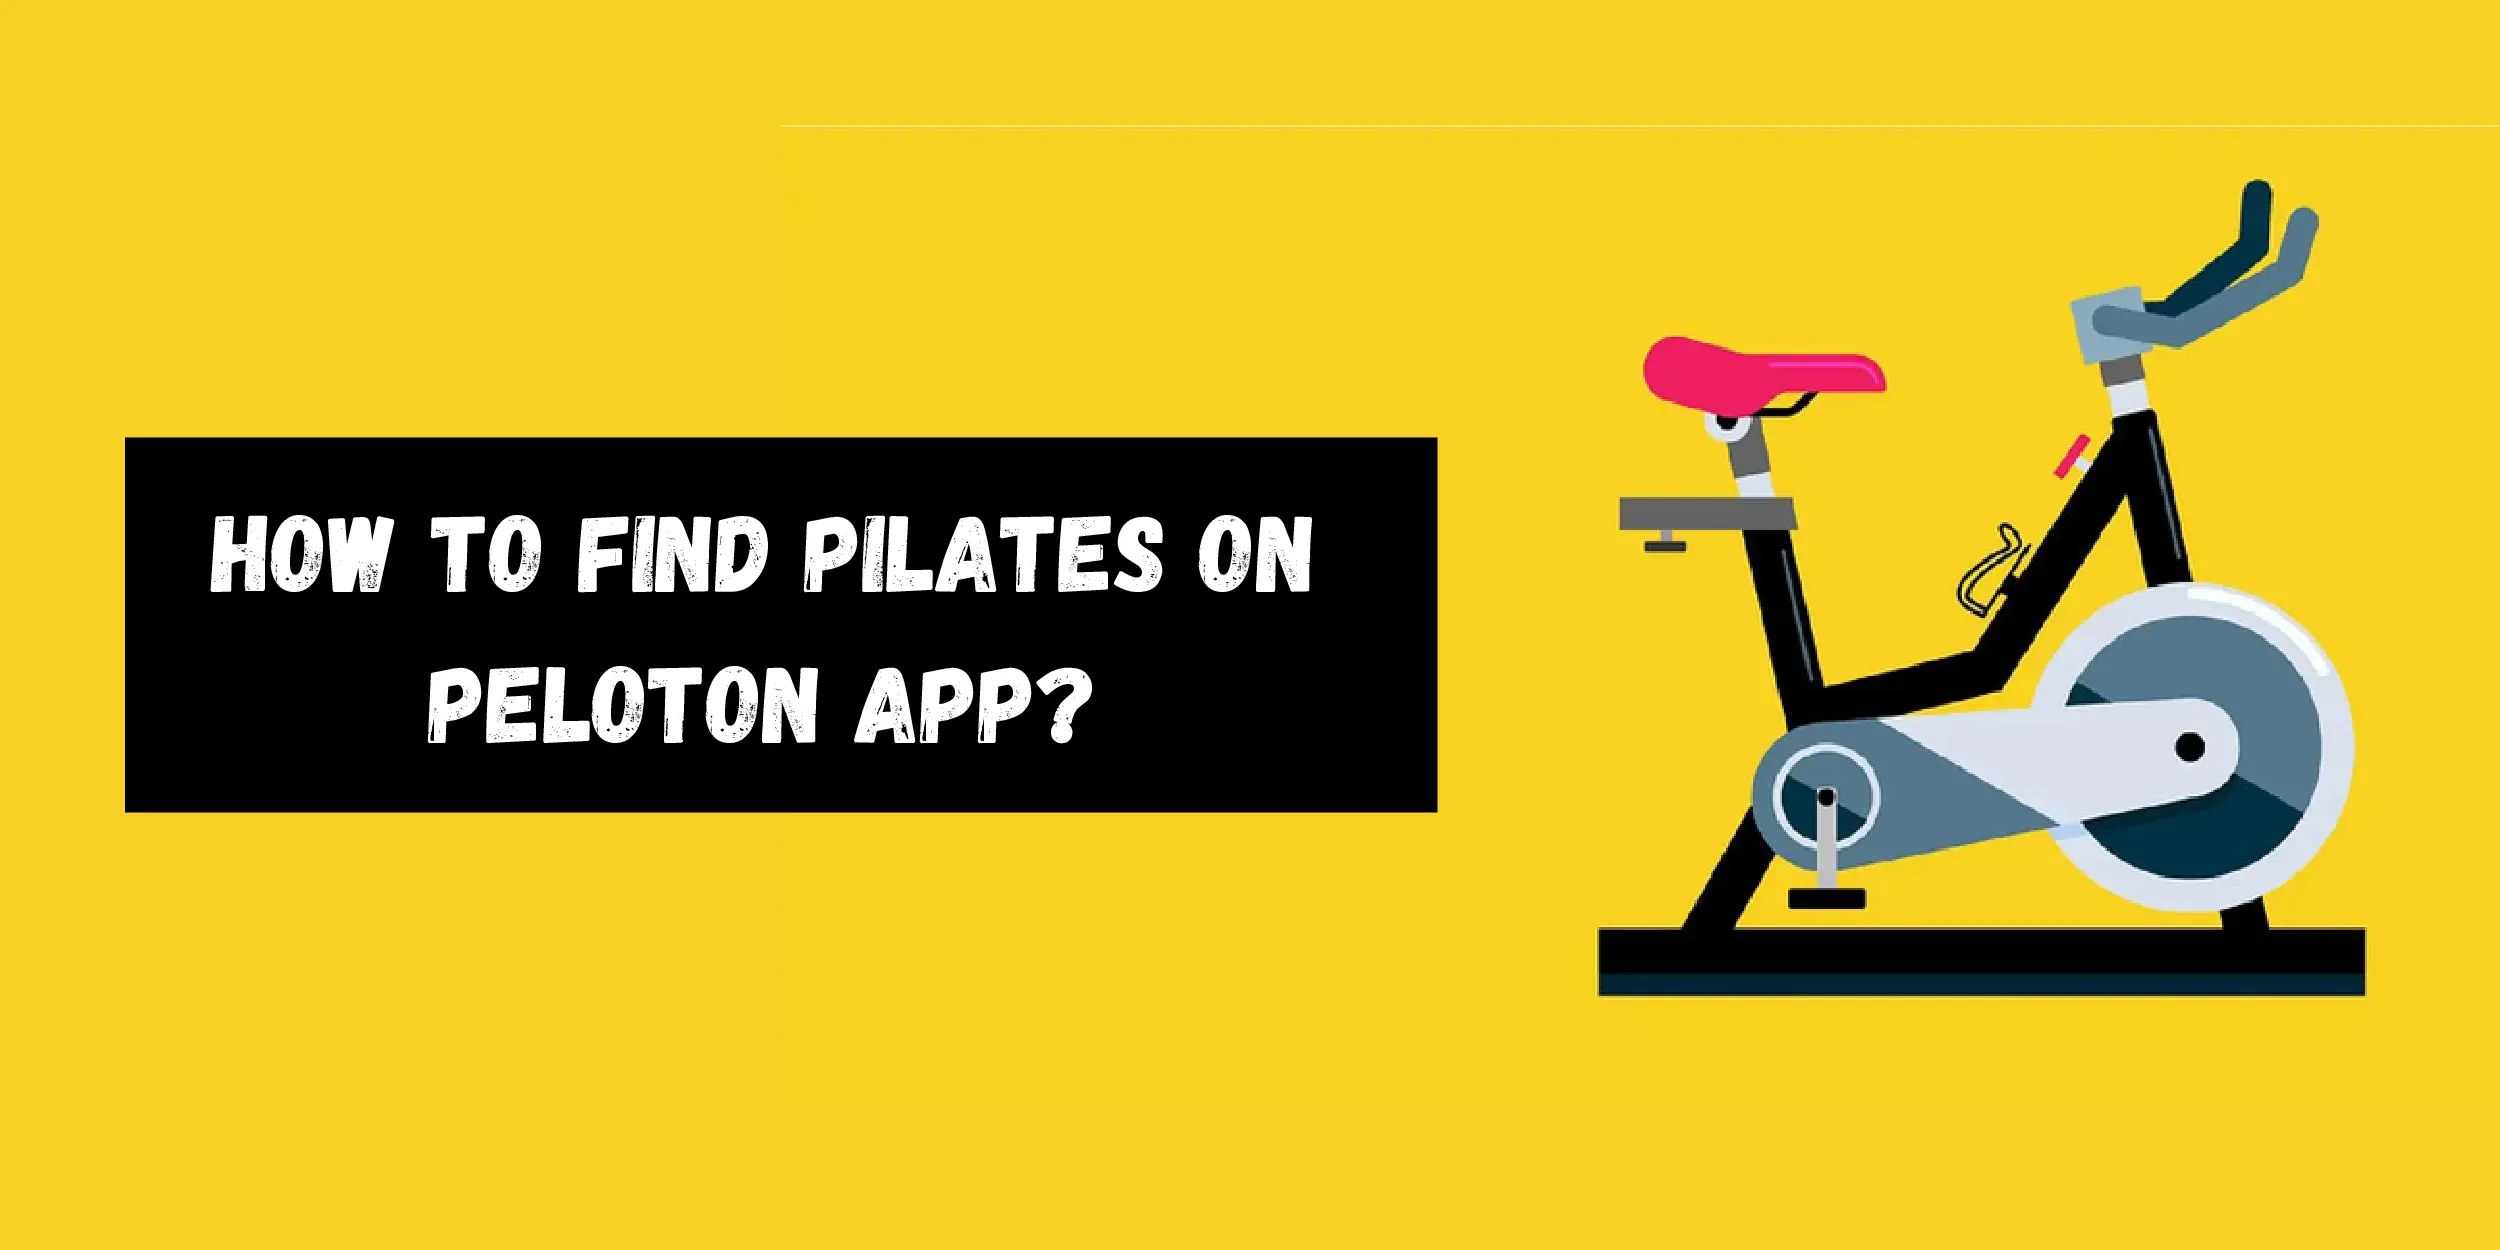 How to Find Pilates on Peloton App?